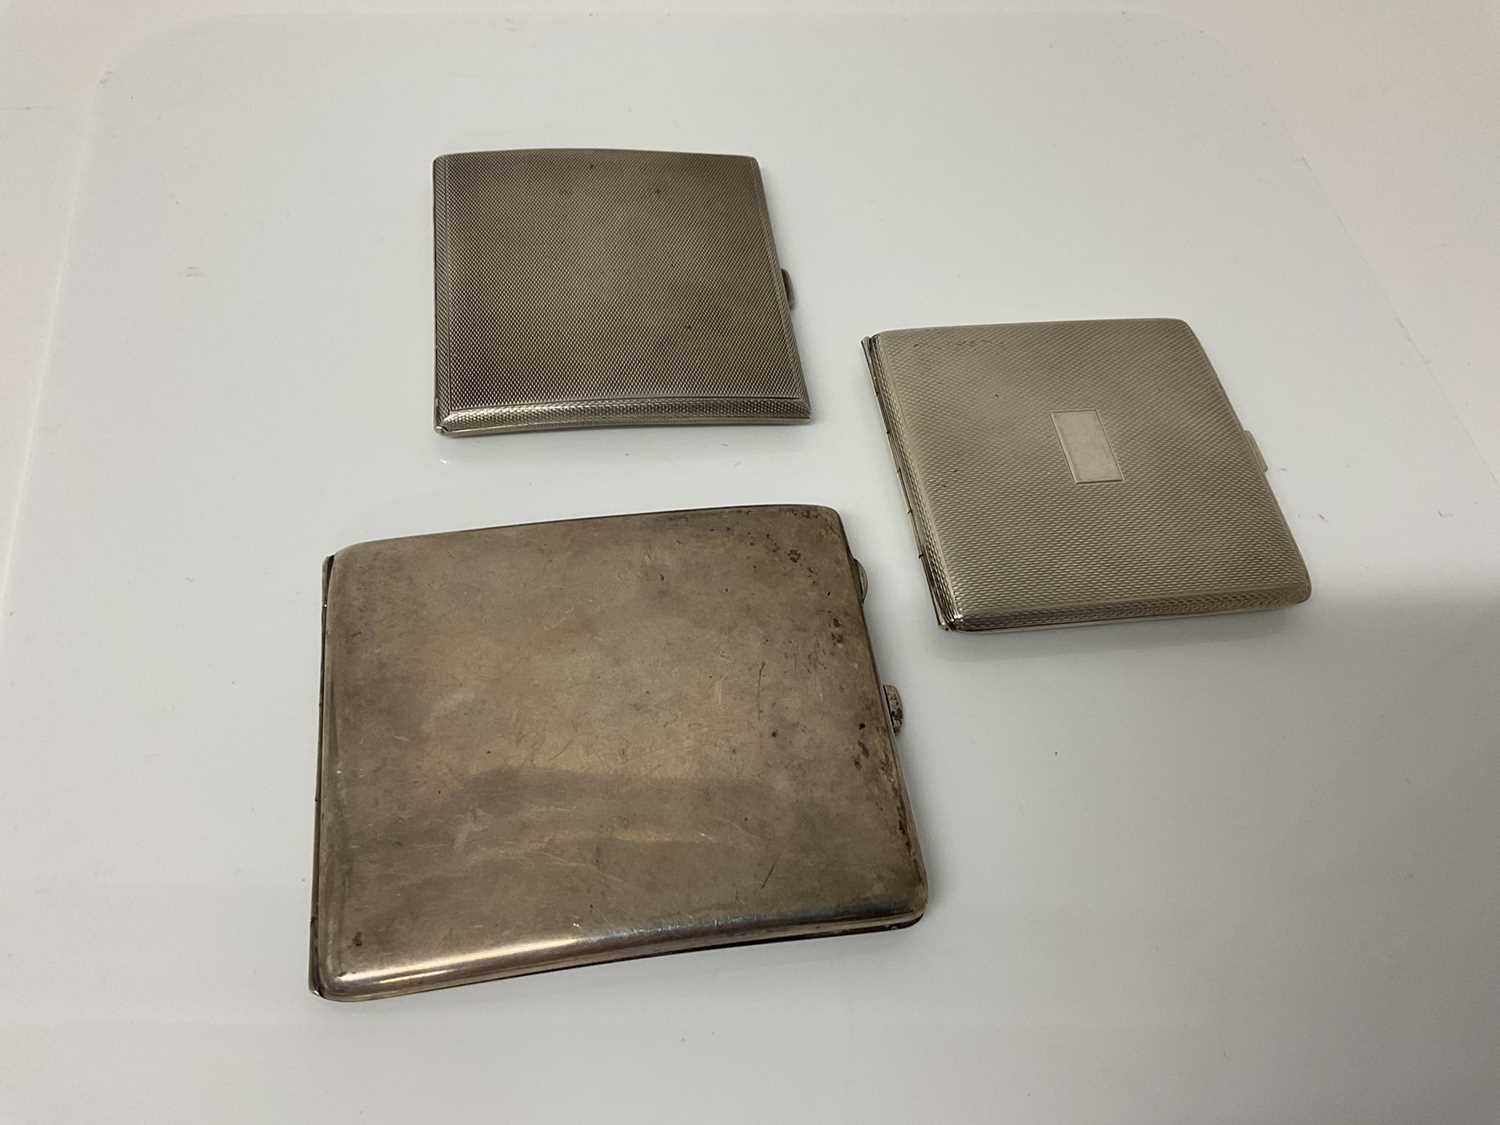 Lot 33 - George V silver cigarette case of rectangular form with engine turned decoration, (Birmingham 1922), maker William Neale Ltd, 8cmm in overall length, together with another similar white metal silve...